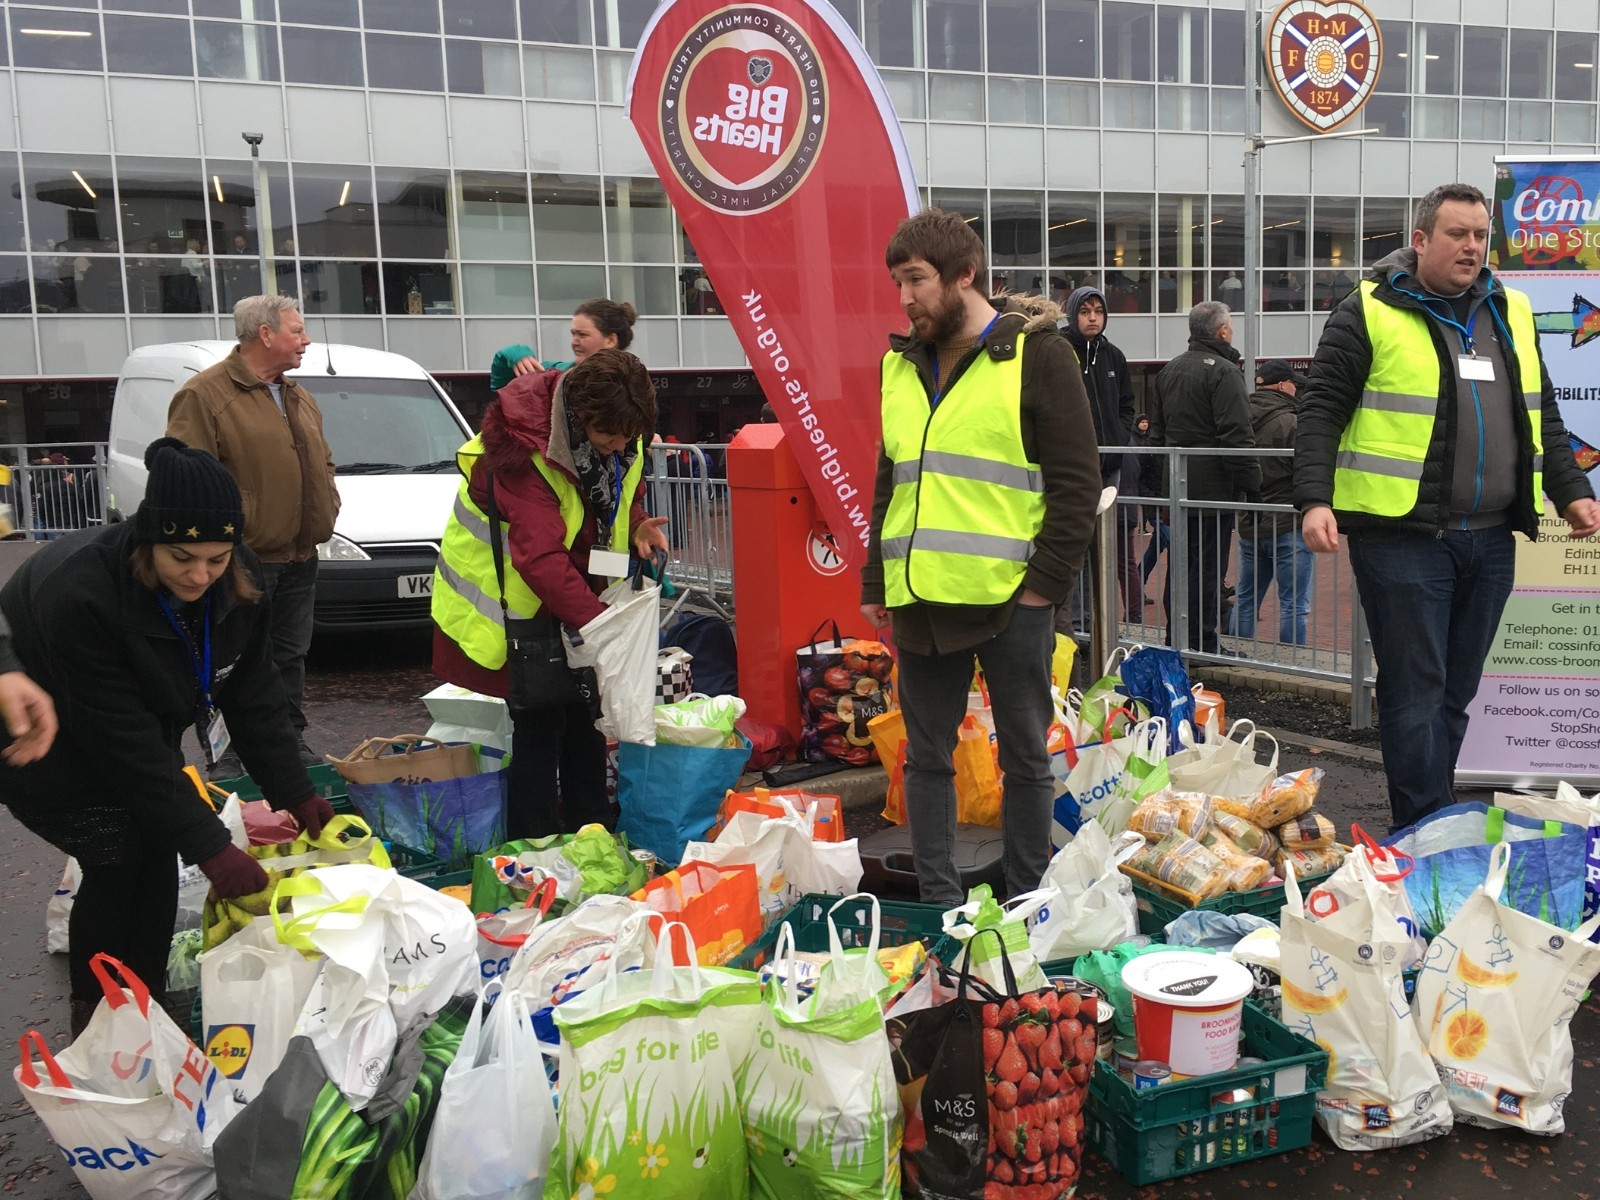  » Tynecastle Foodbank Collection –  Sunday 20th October, 10AM – 12:30PM